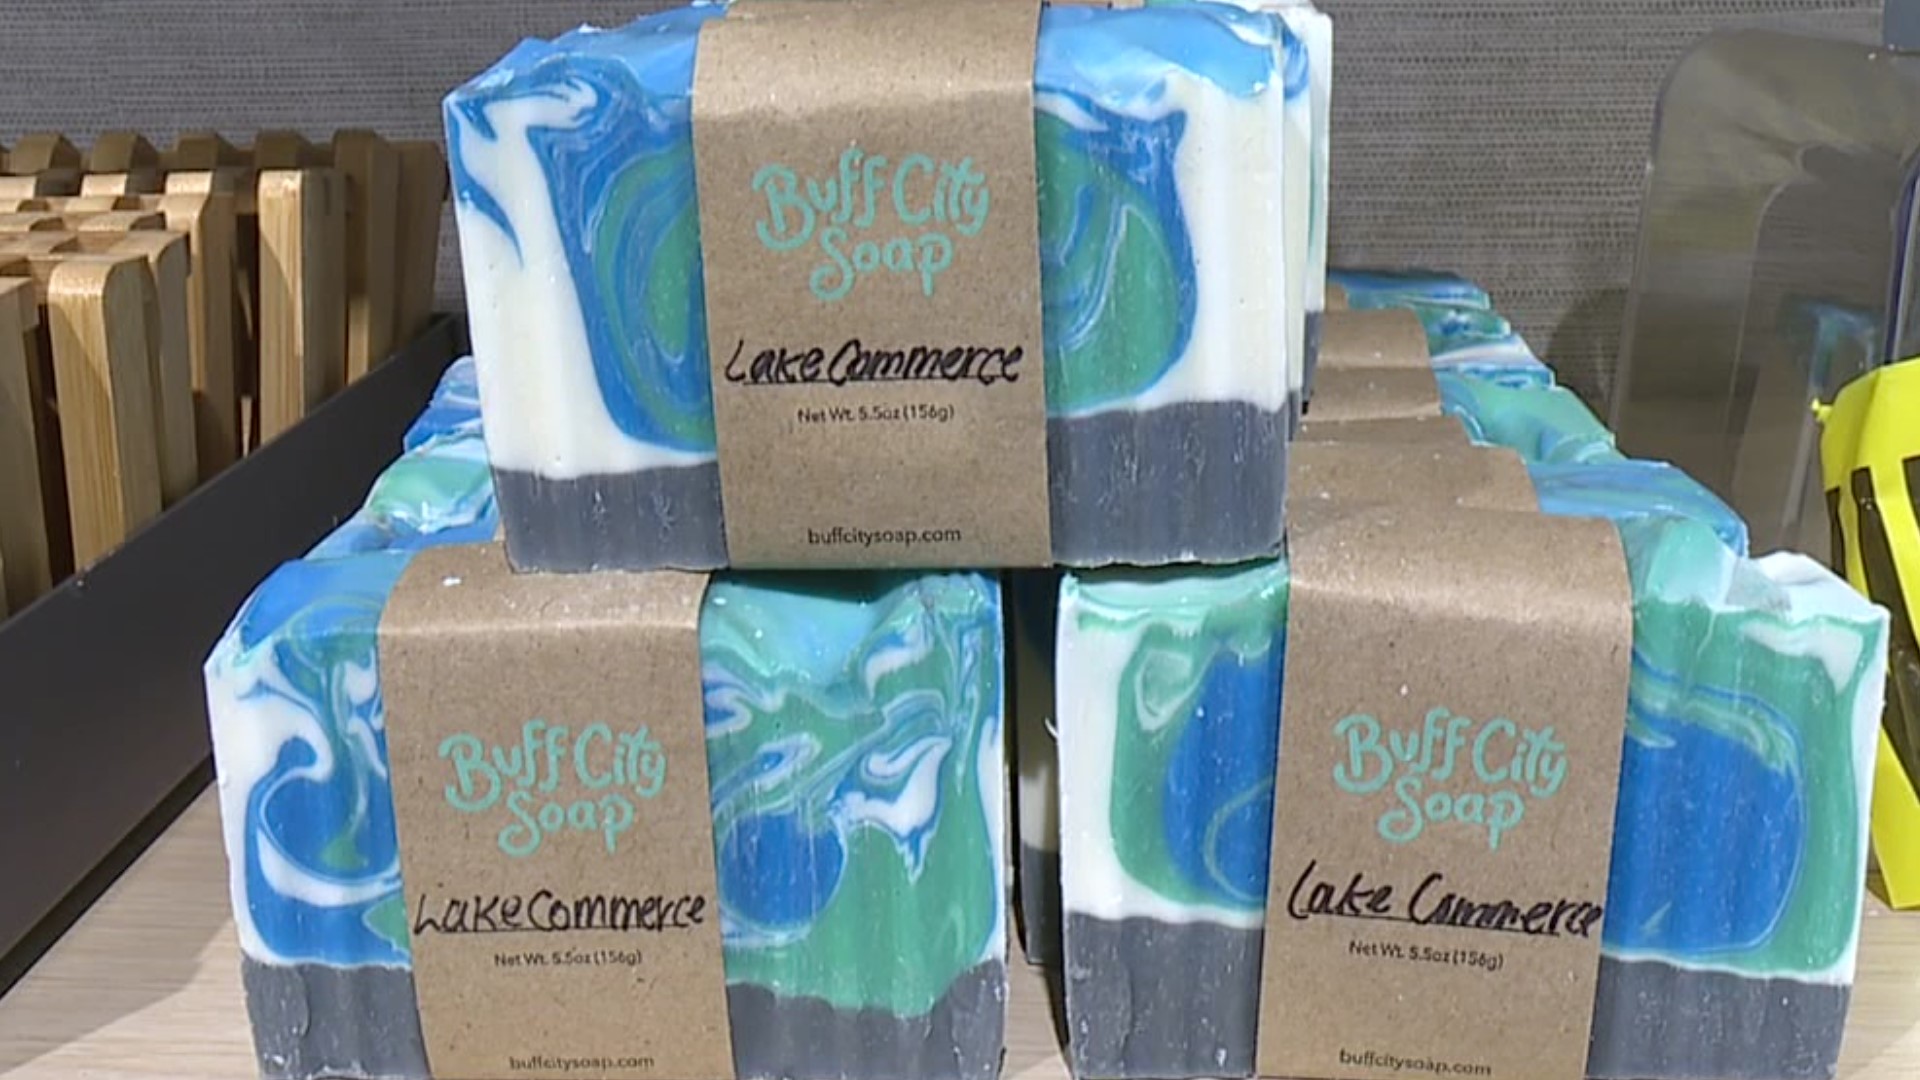 Lake Commerce started off as a joke from the Dickson City Police Department. Buff City Soaps came up with an idea to name a soap after the fictional body of water.